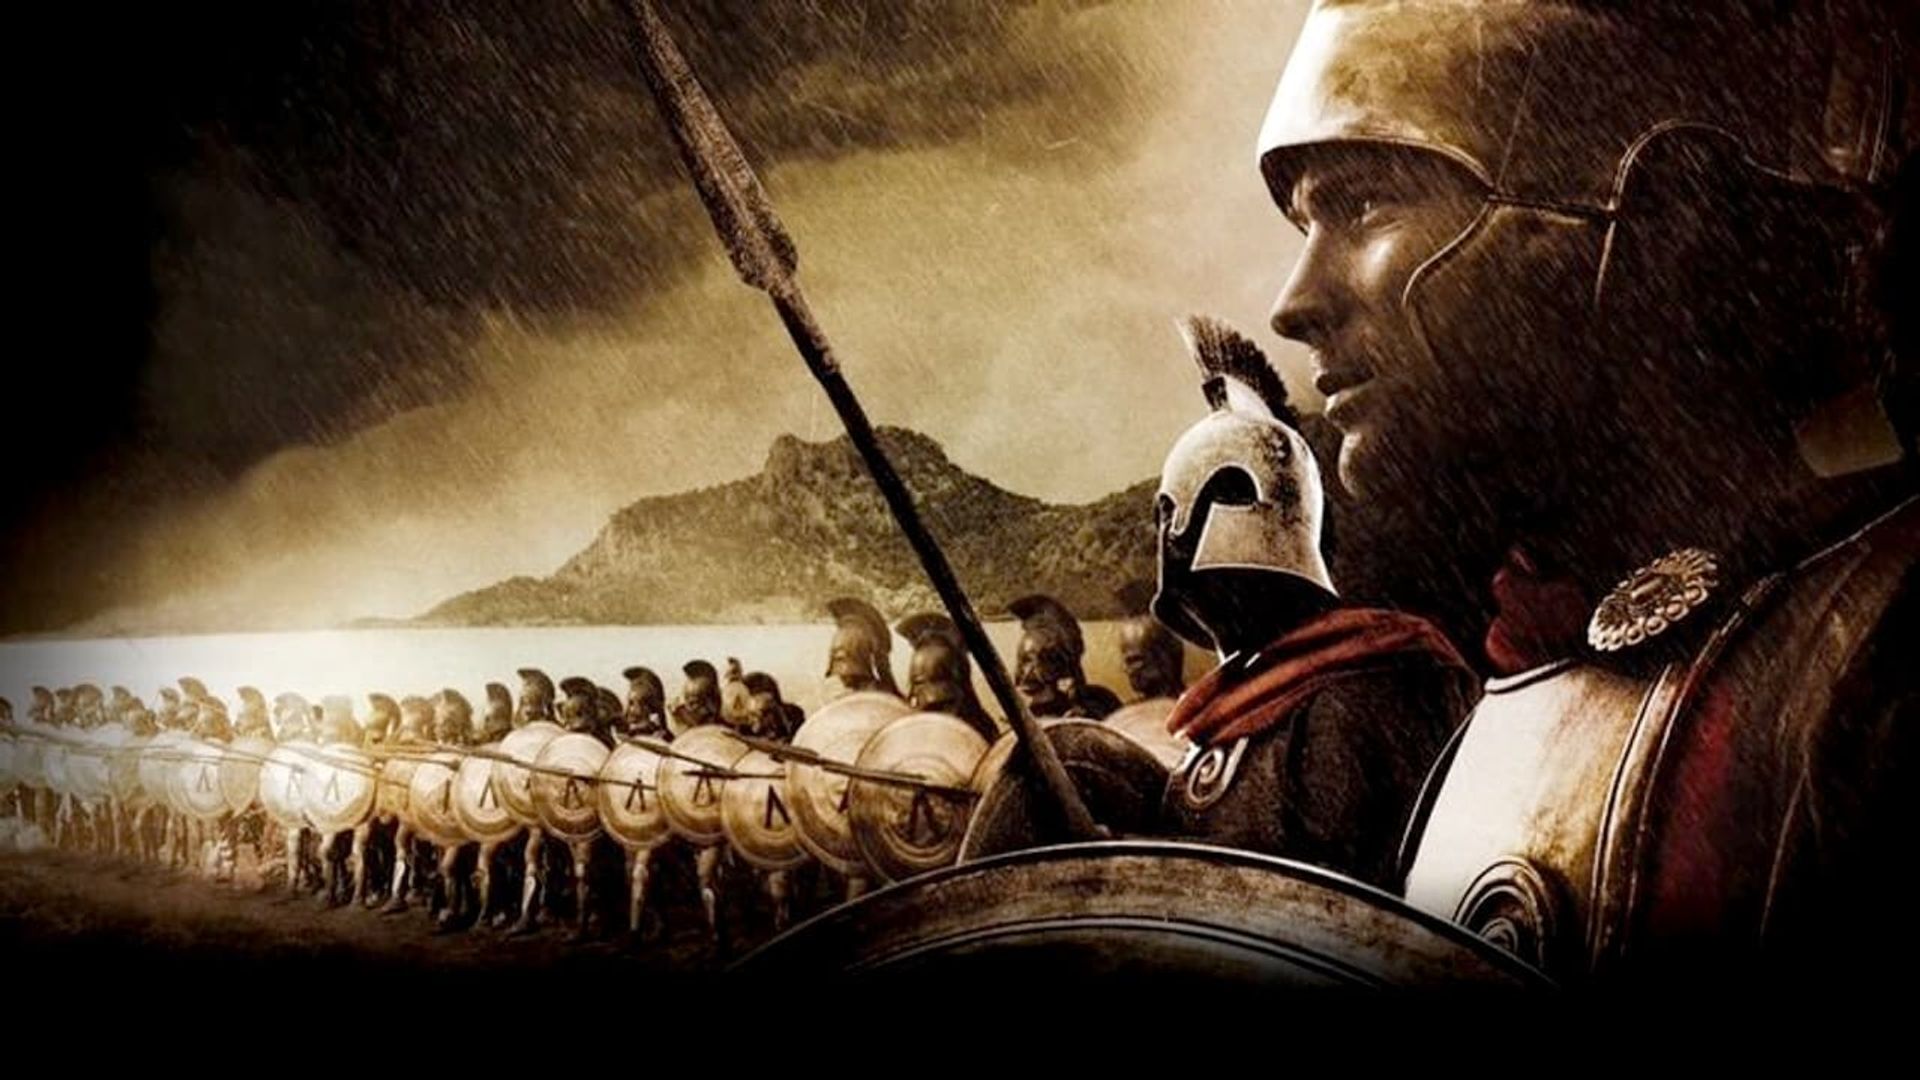 The 300 Spartans background